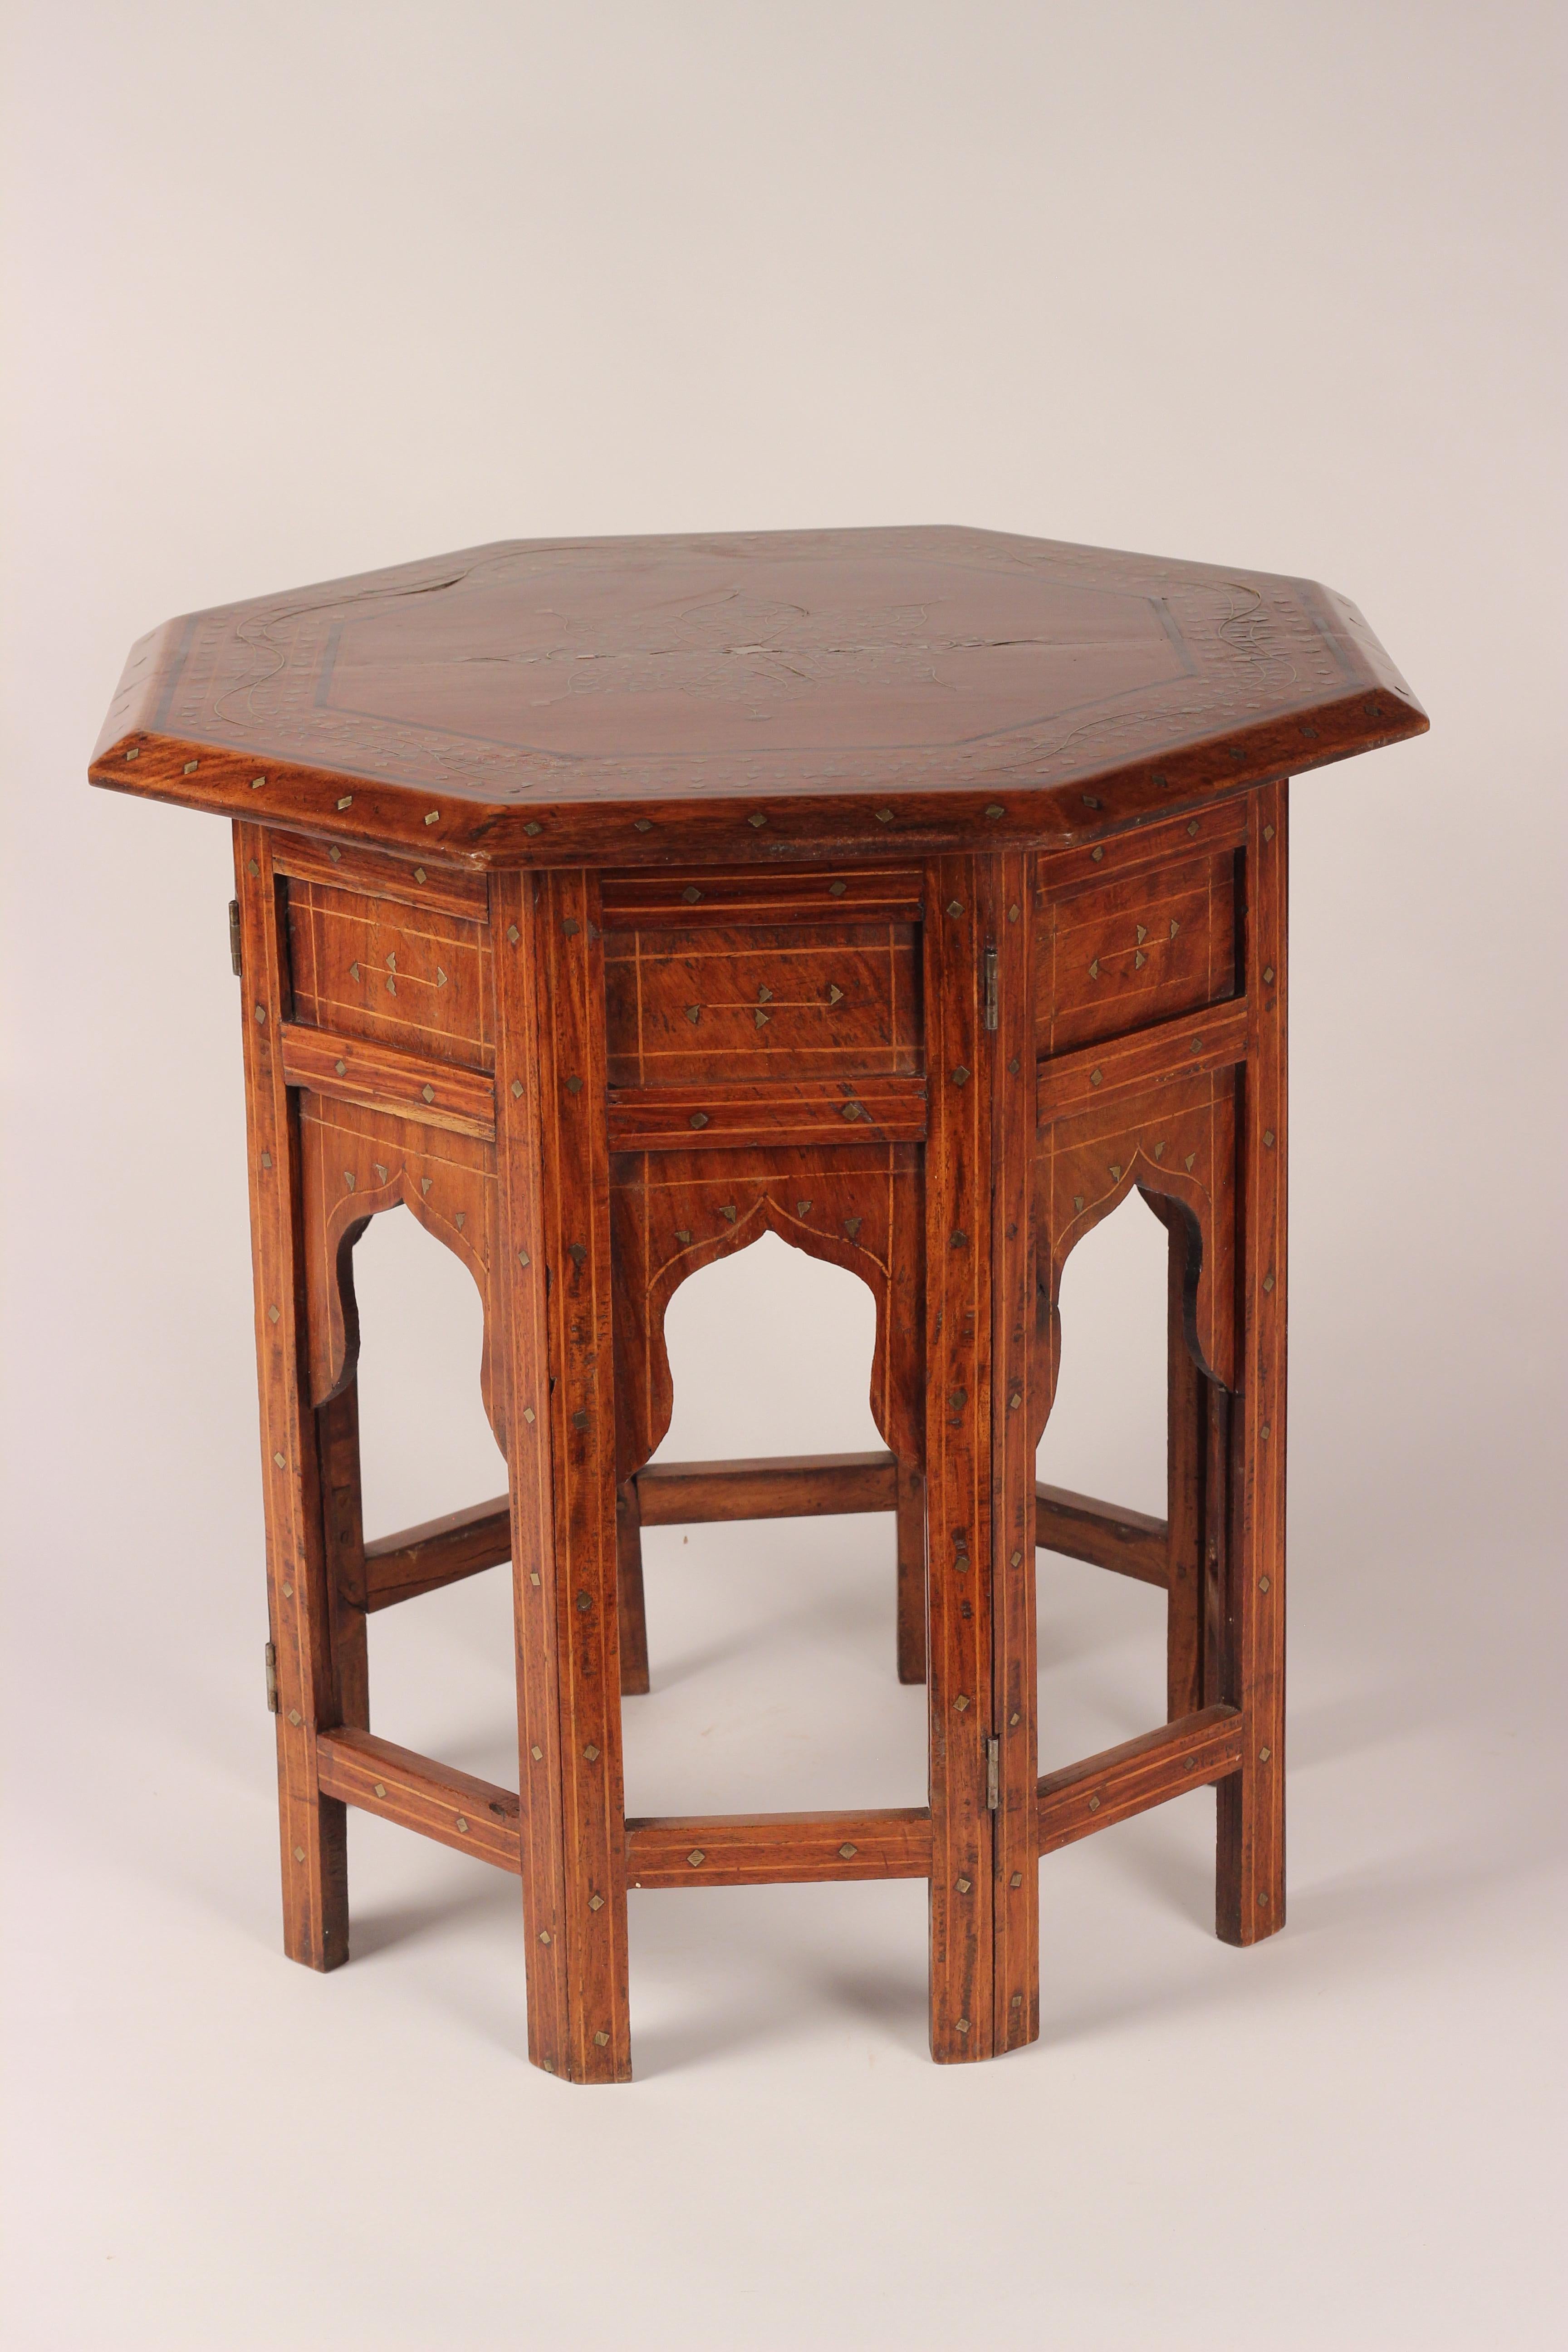 An octagonal side or drinks table with string inlay and brass inlay filigree top. Similarly decorated to folding base, which reduces the volume further, for ease of shipping. A striking warm and crafted piece of Anglo Indian, circa 1900. This table